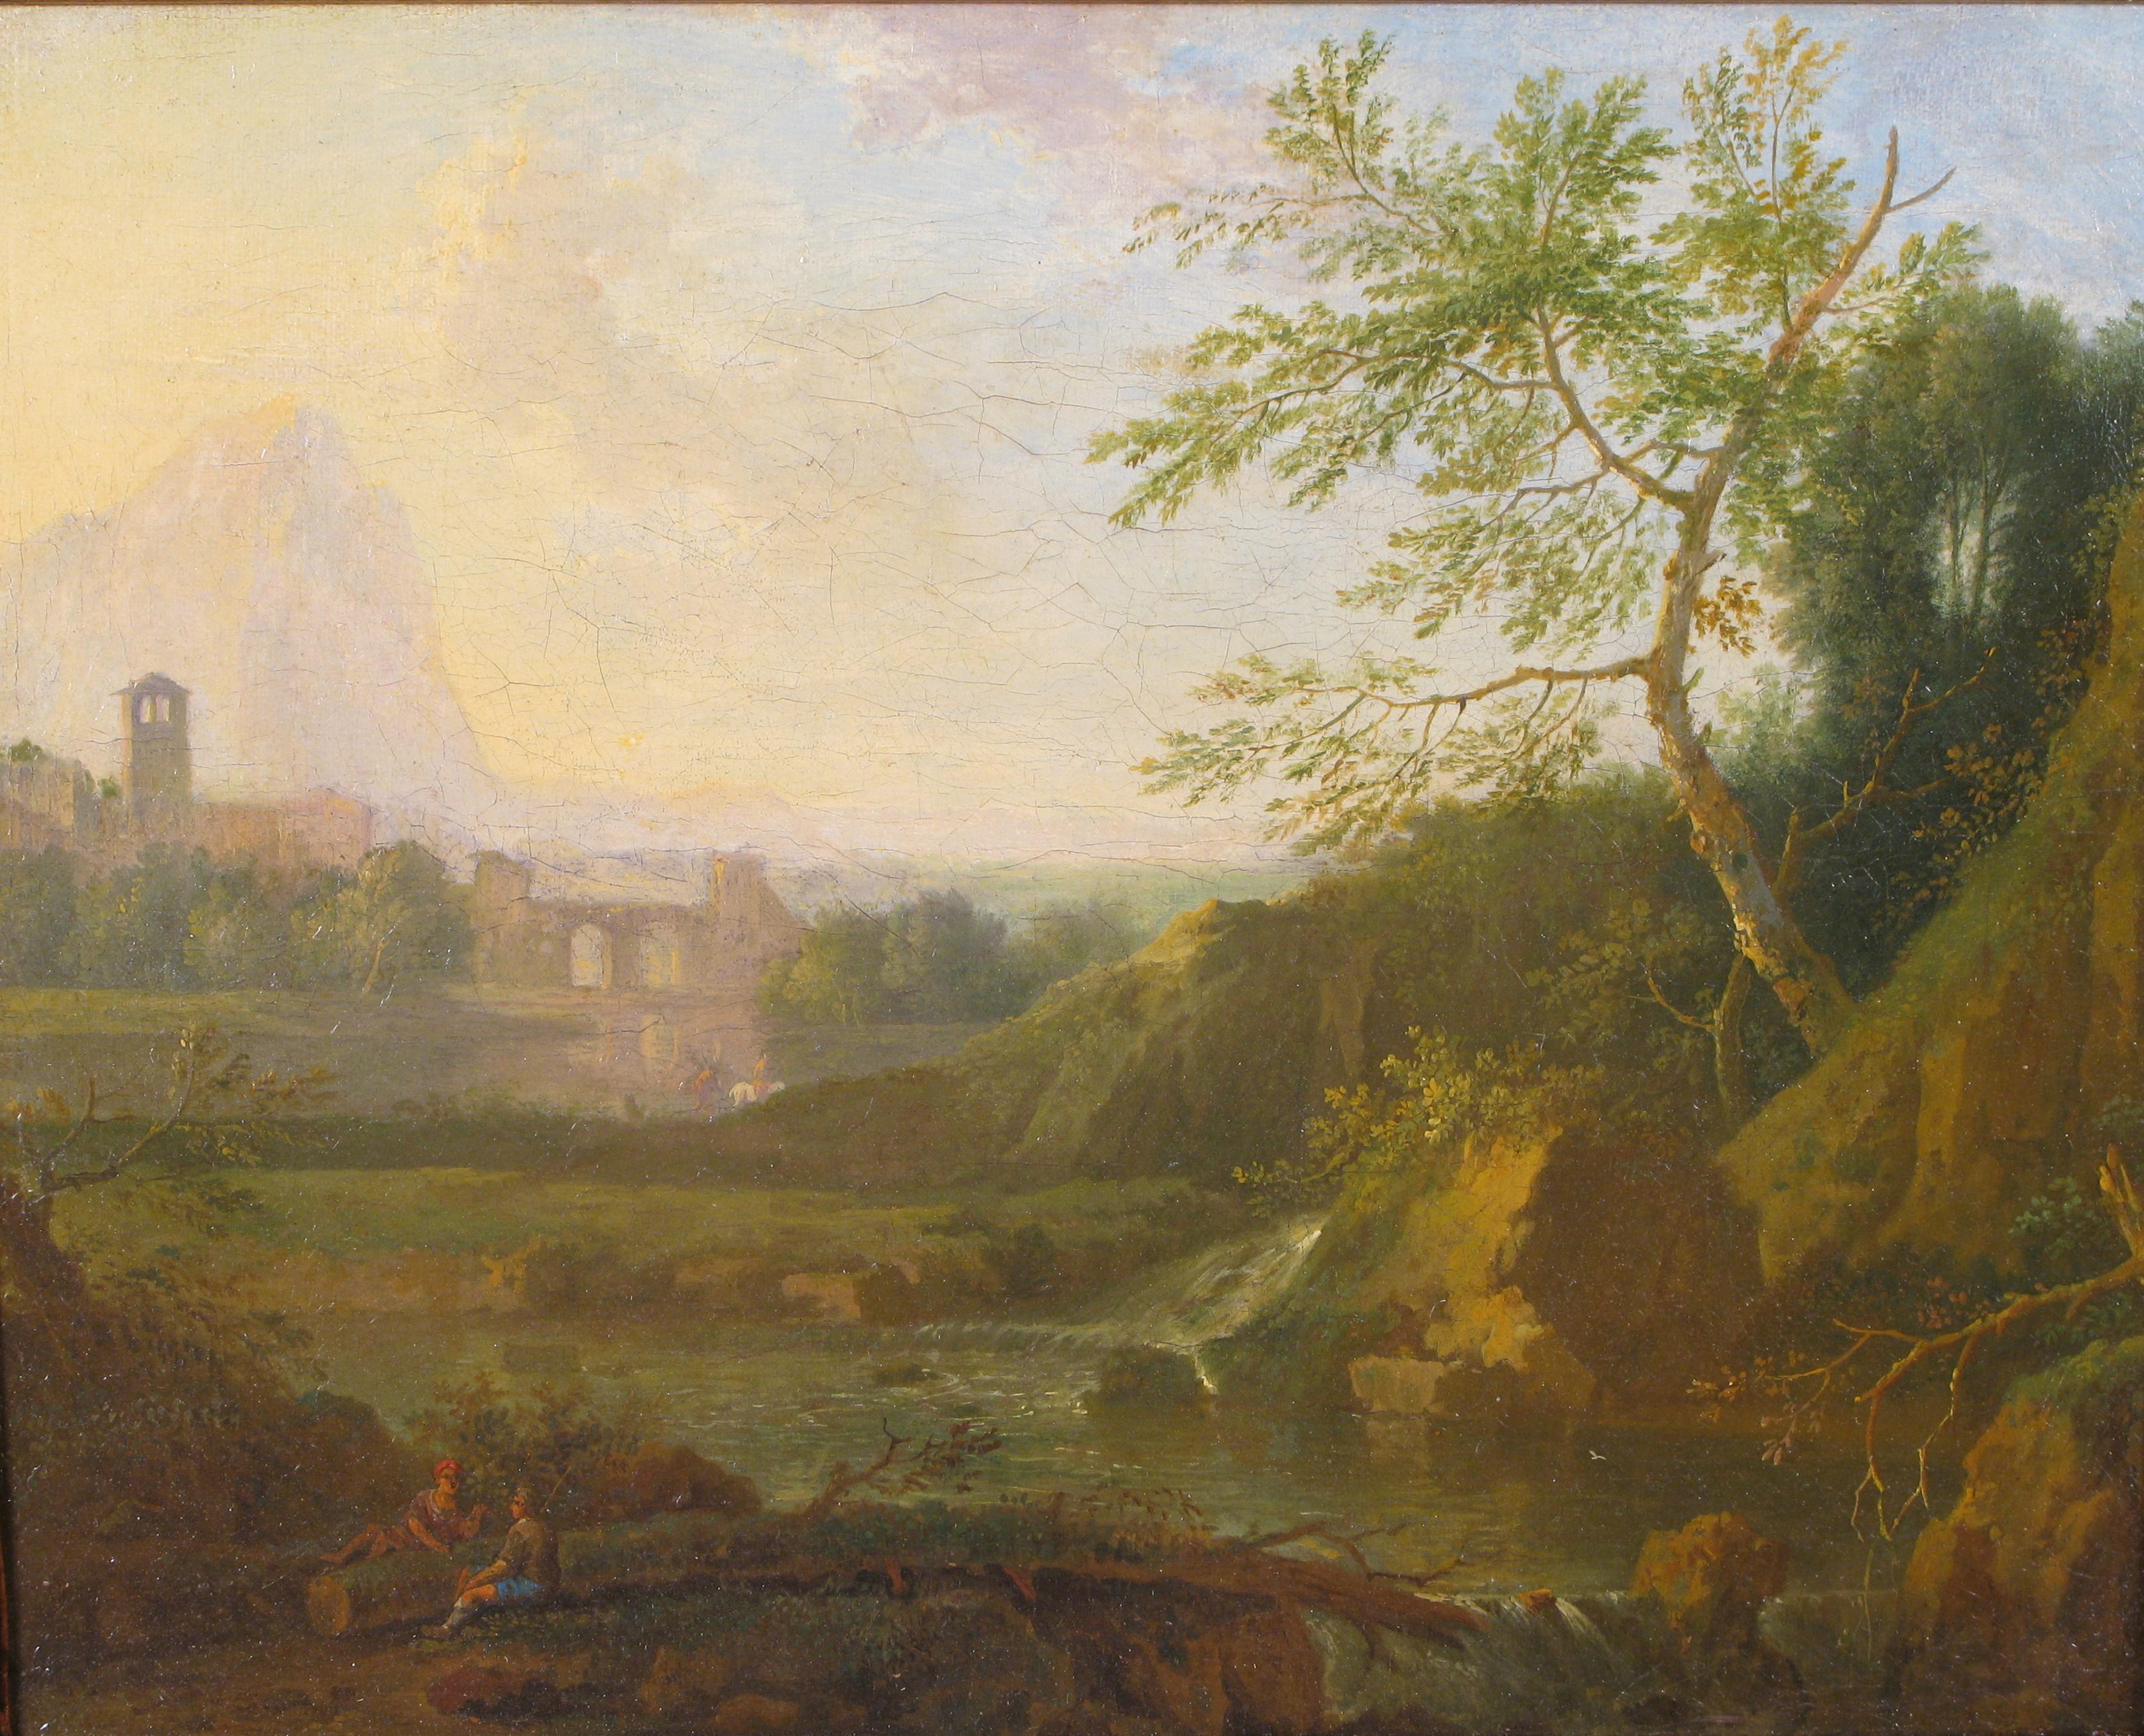 Grand tour - Landscape of the Roman countryside with architecture and characters

Oil painting on canvas

Rome 18th century

Measurements: 27 x 33 - 43.5 x 50.5 cm (with frame)

On the bed of a river, next to a bend formed between two small